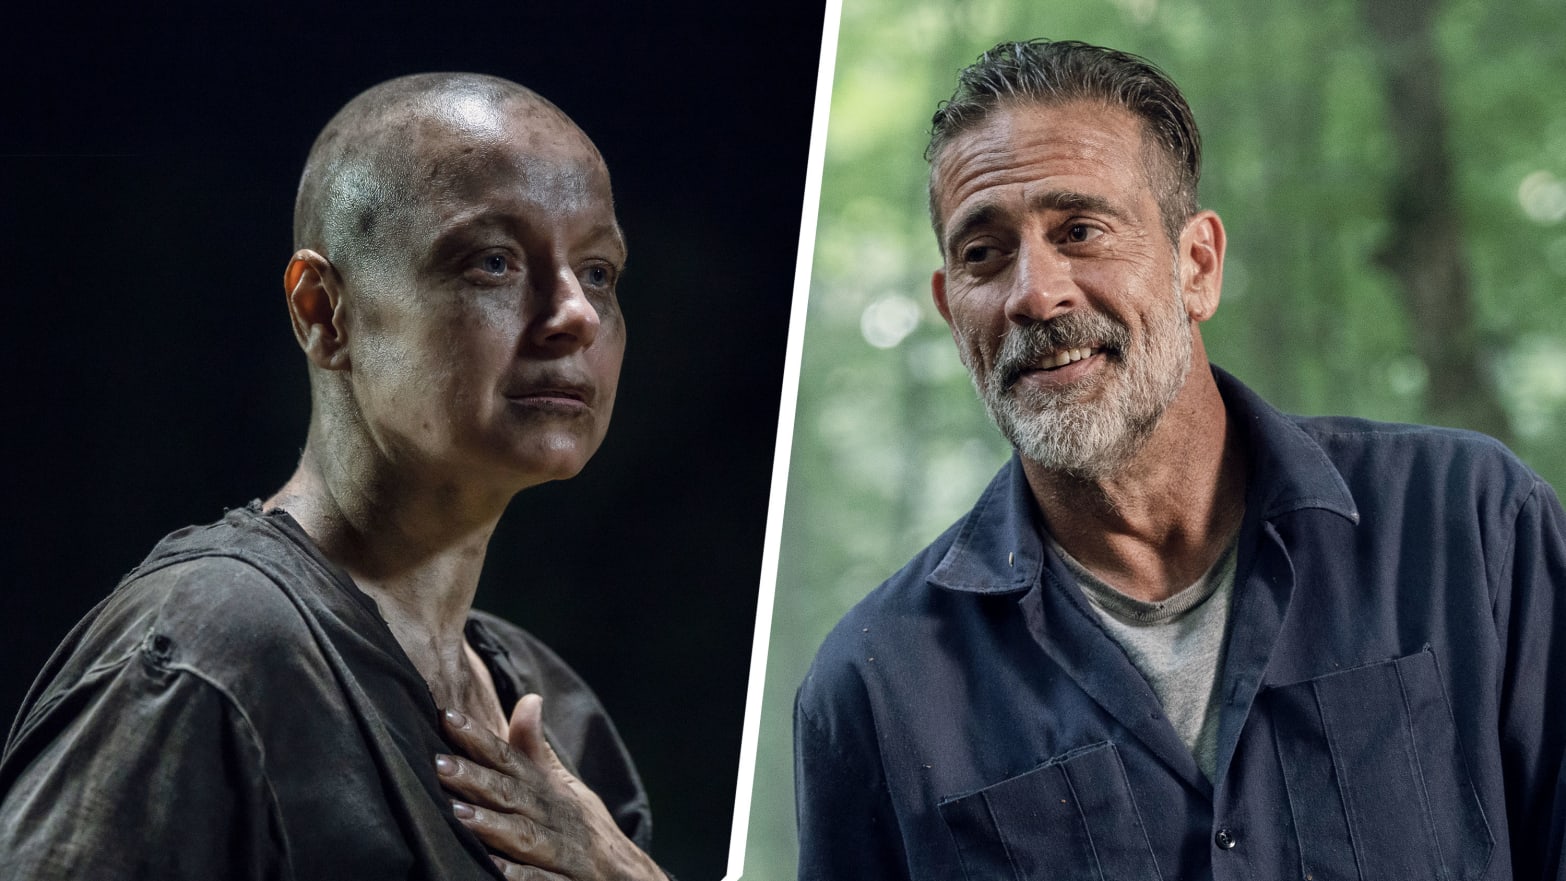 Oh my eyes!: Walking Dead fans react to Negan and 